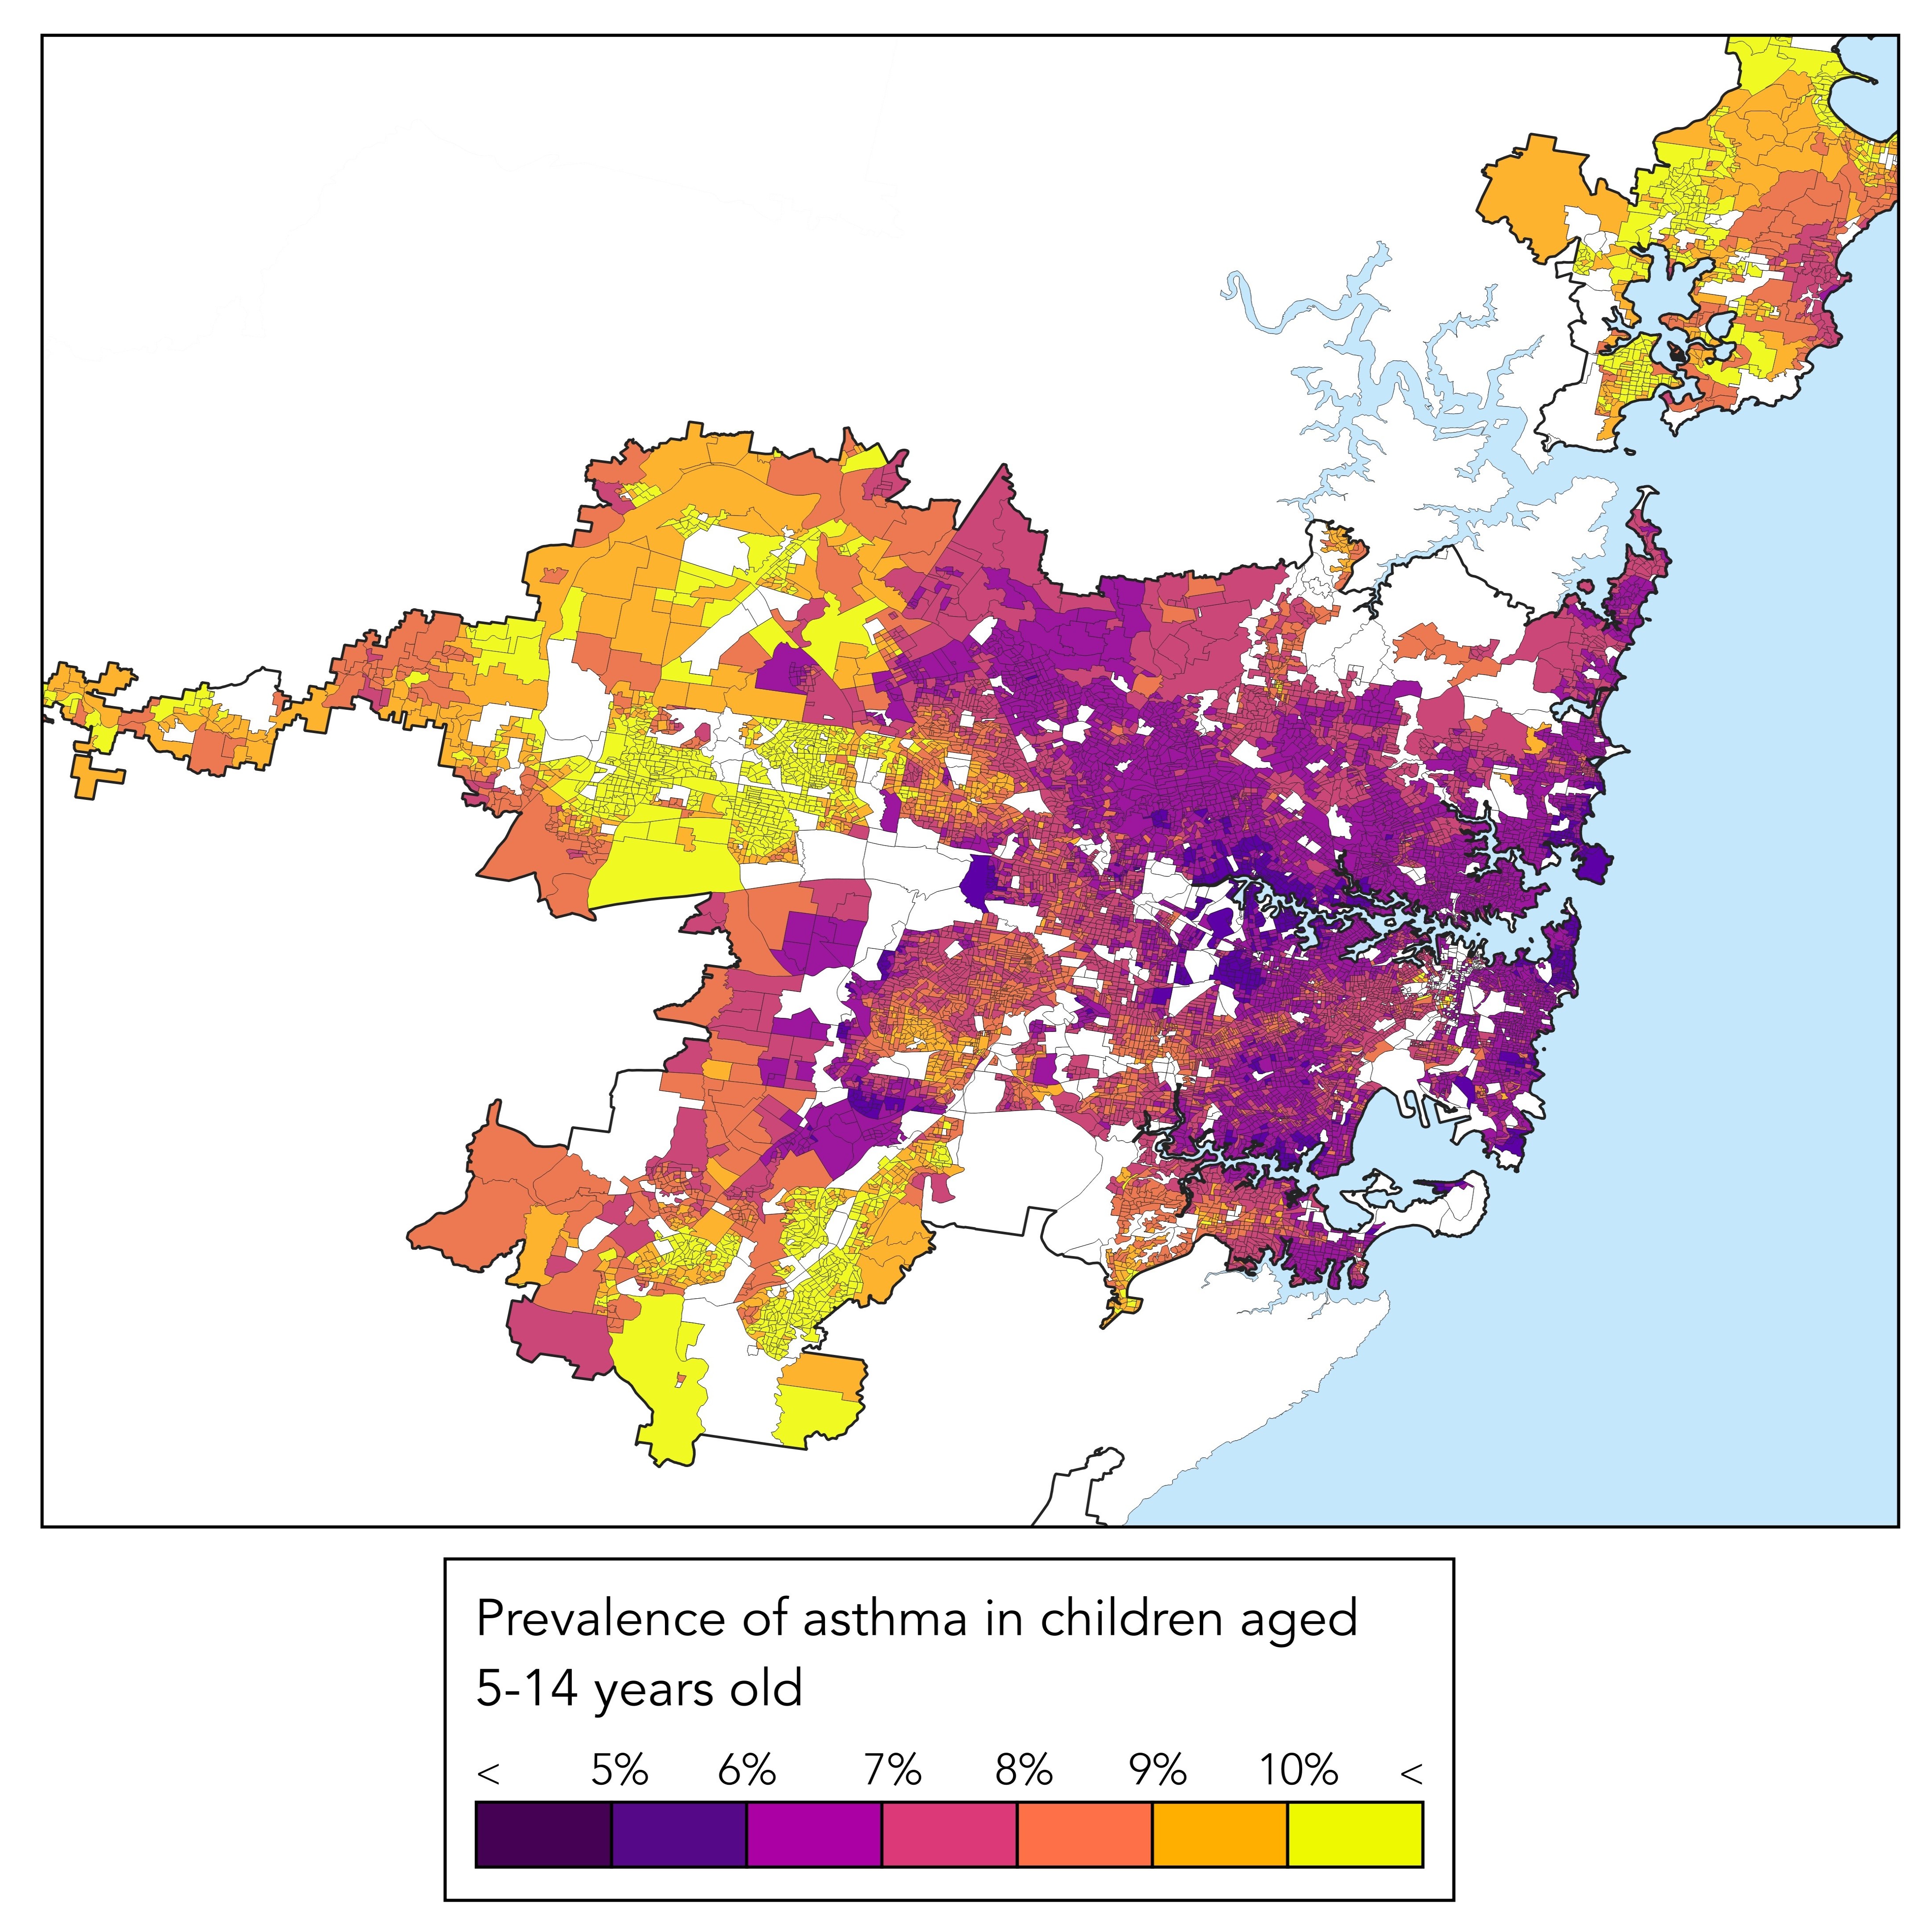 A map of sydney with asthma prone areas iin yellow on the outer suburbs